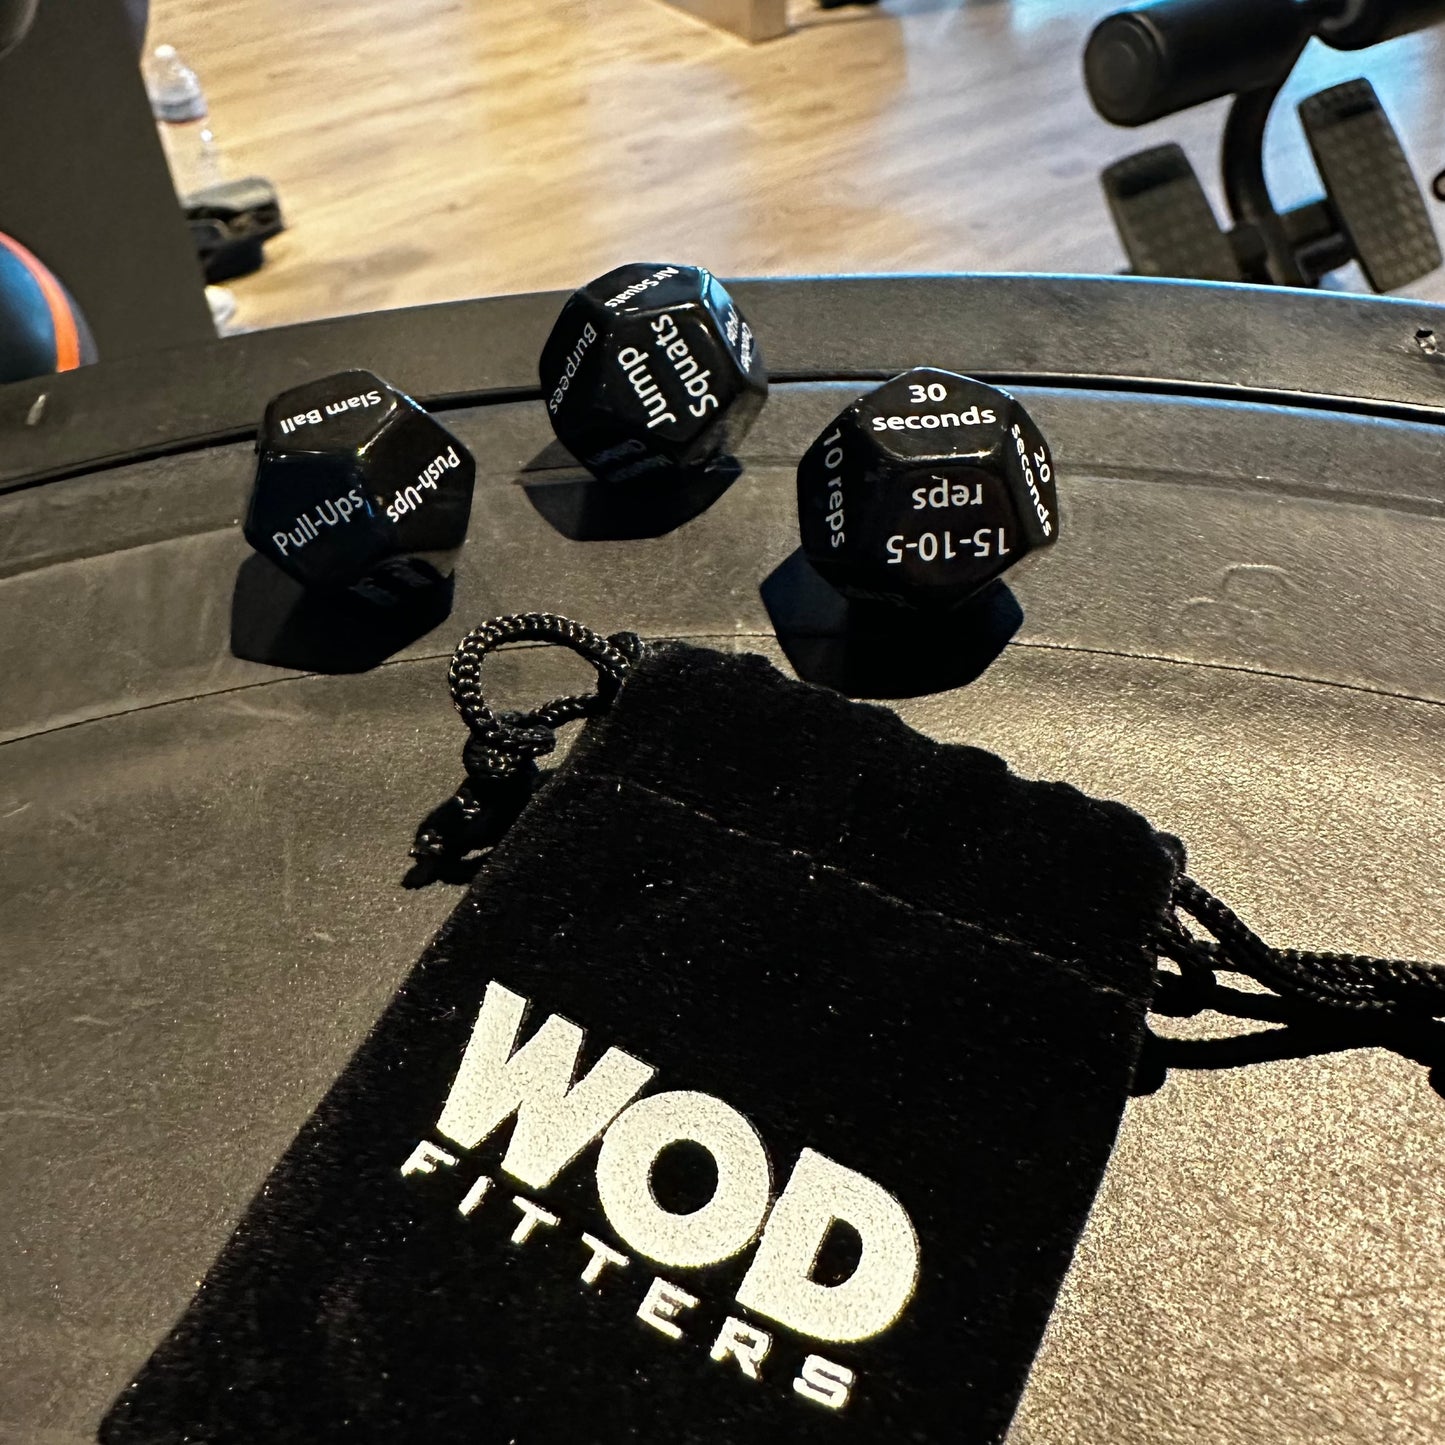 WODFitters Workout Dice Set for Constantly Varied Workouts